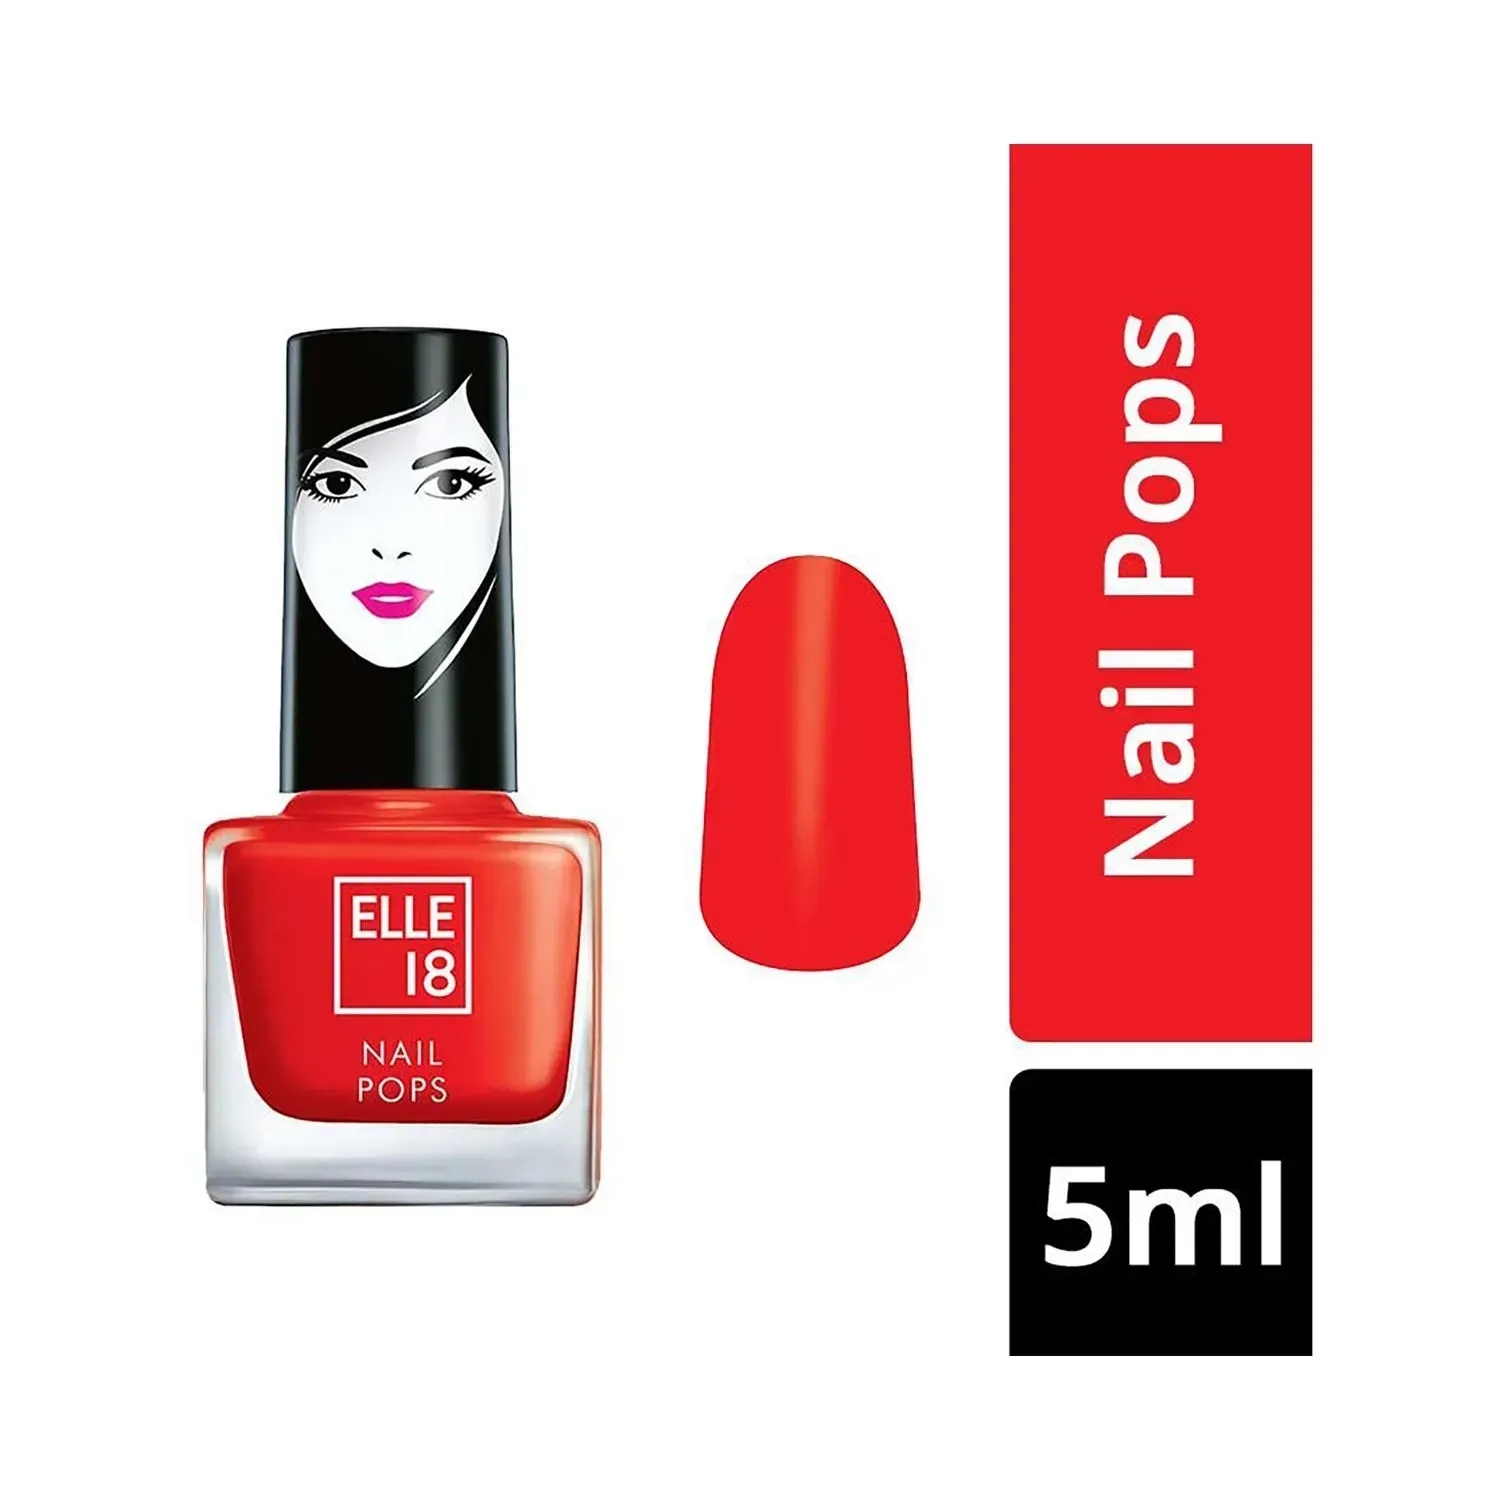 Buy Elle18 Glossy Finish Nail Pops 185 (5 Ml) Online at Low Prices in India  - Amazon.in